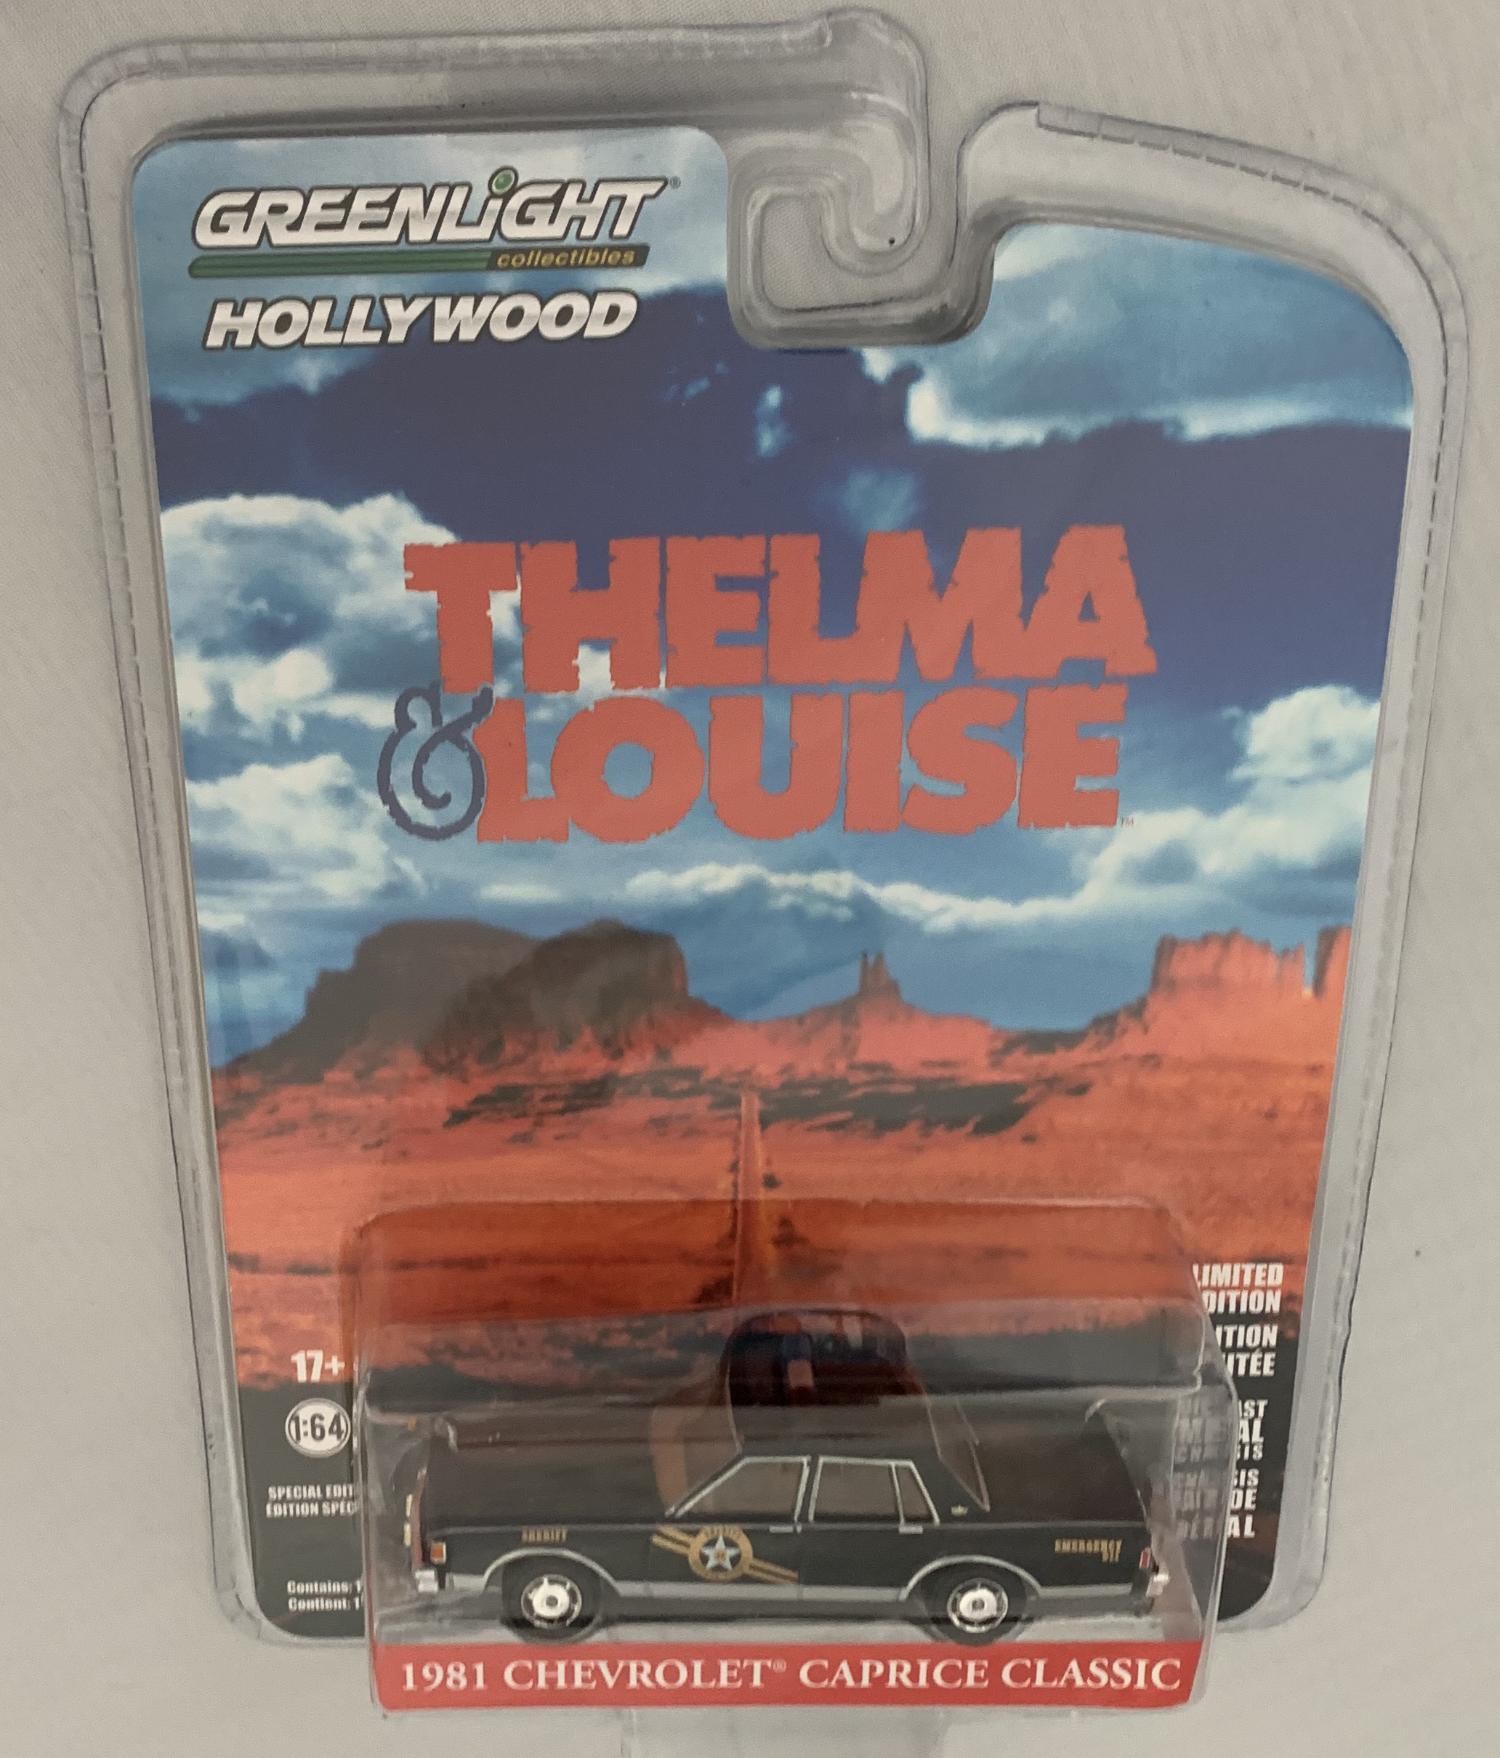 Thelma & Louise 1981 Chevrolet Caprice Classic in black, Navajo county police car, 1:64 scale model from Greenlight, limited edition